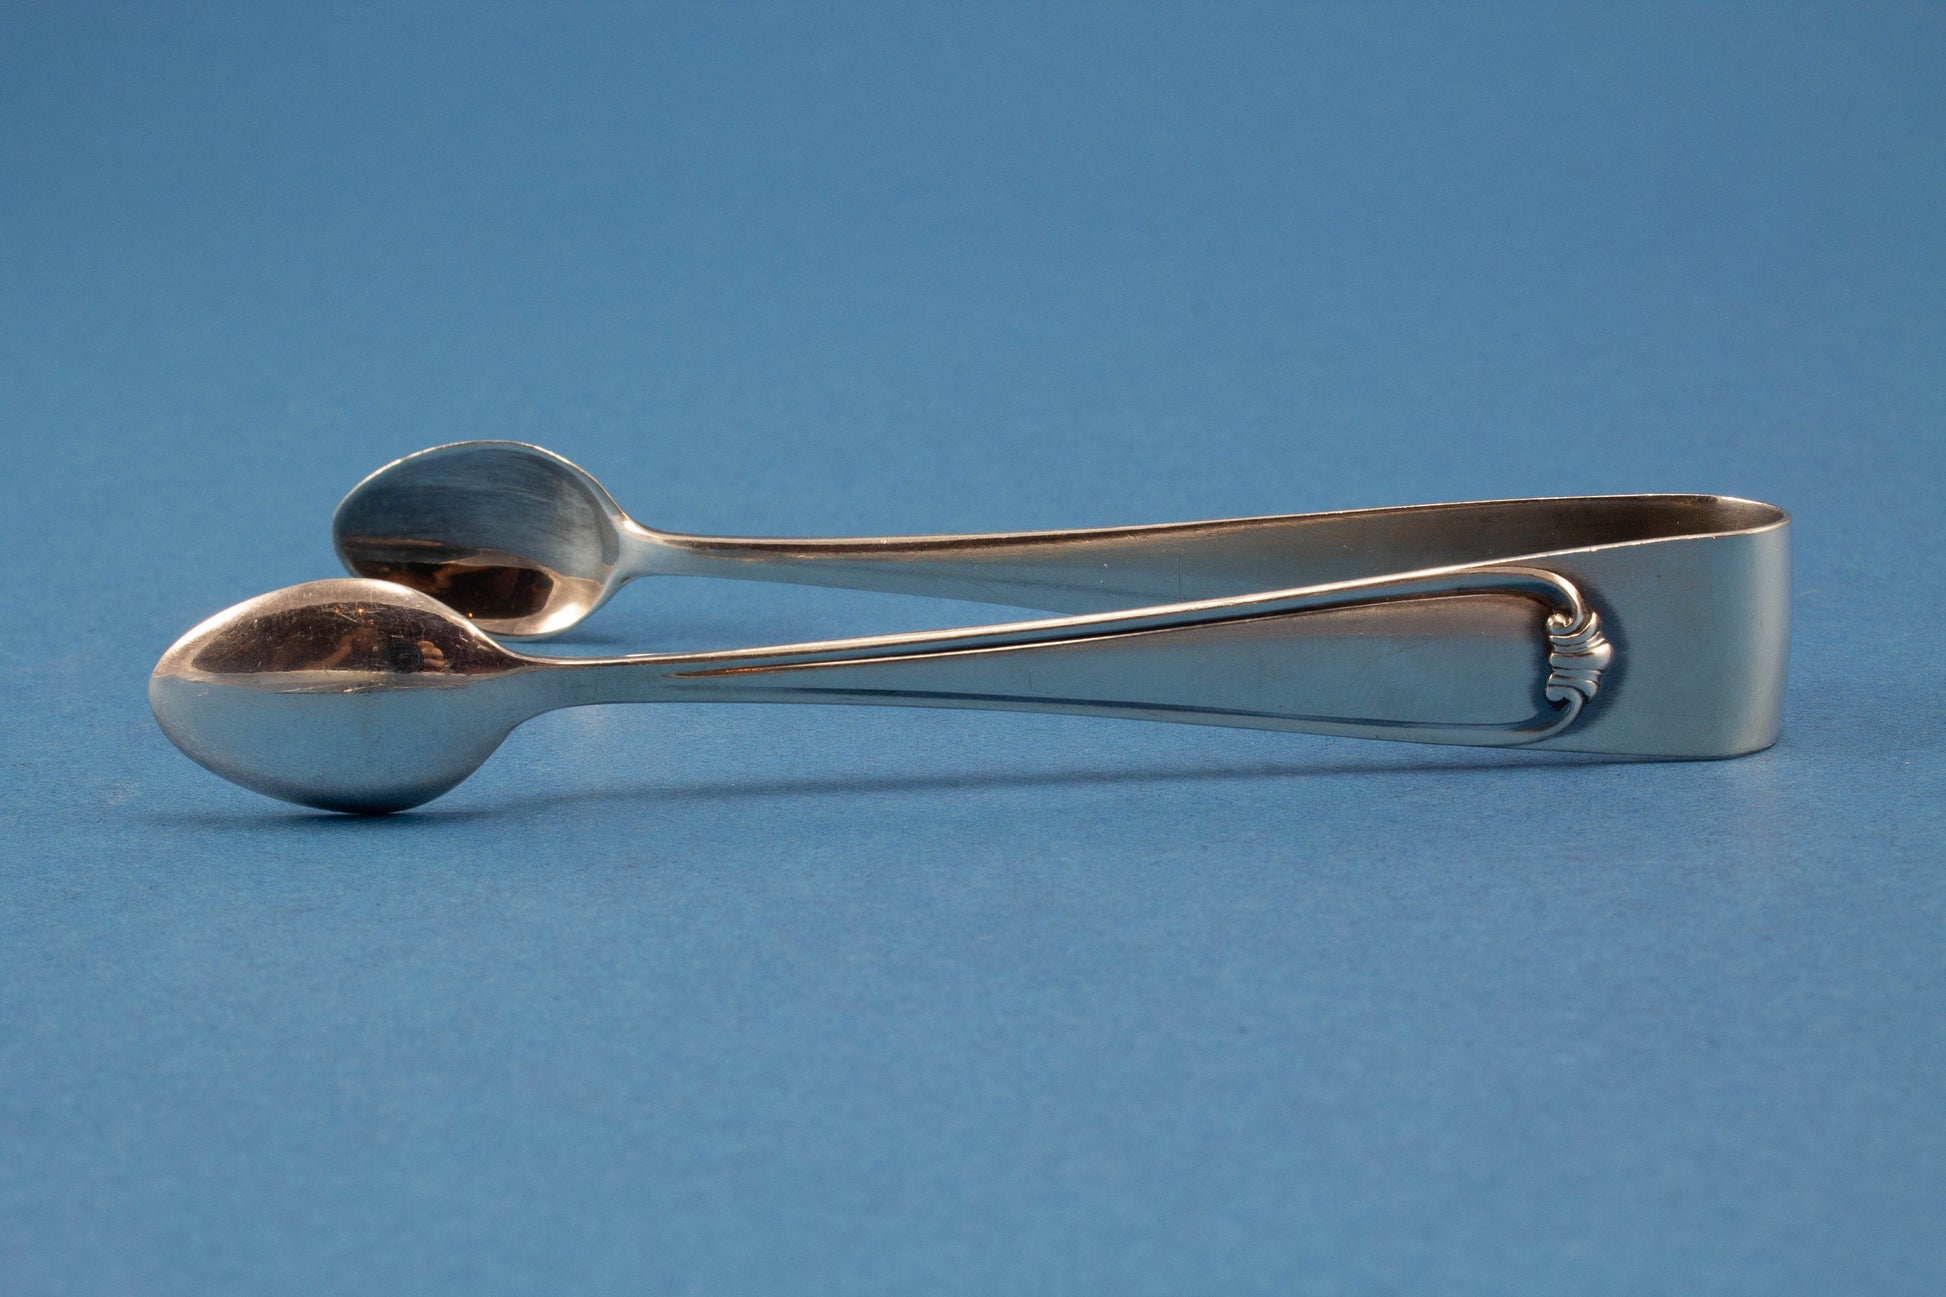 Silver-plated cake server with sugar tongs and sugar spoon from Wellner